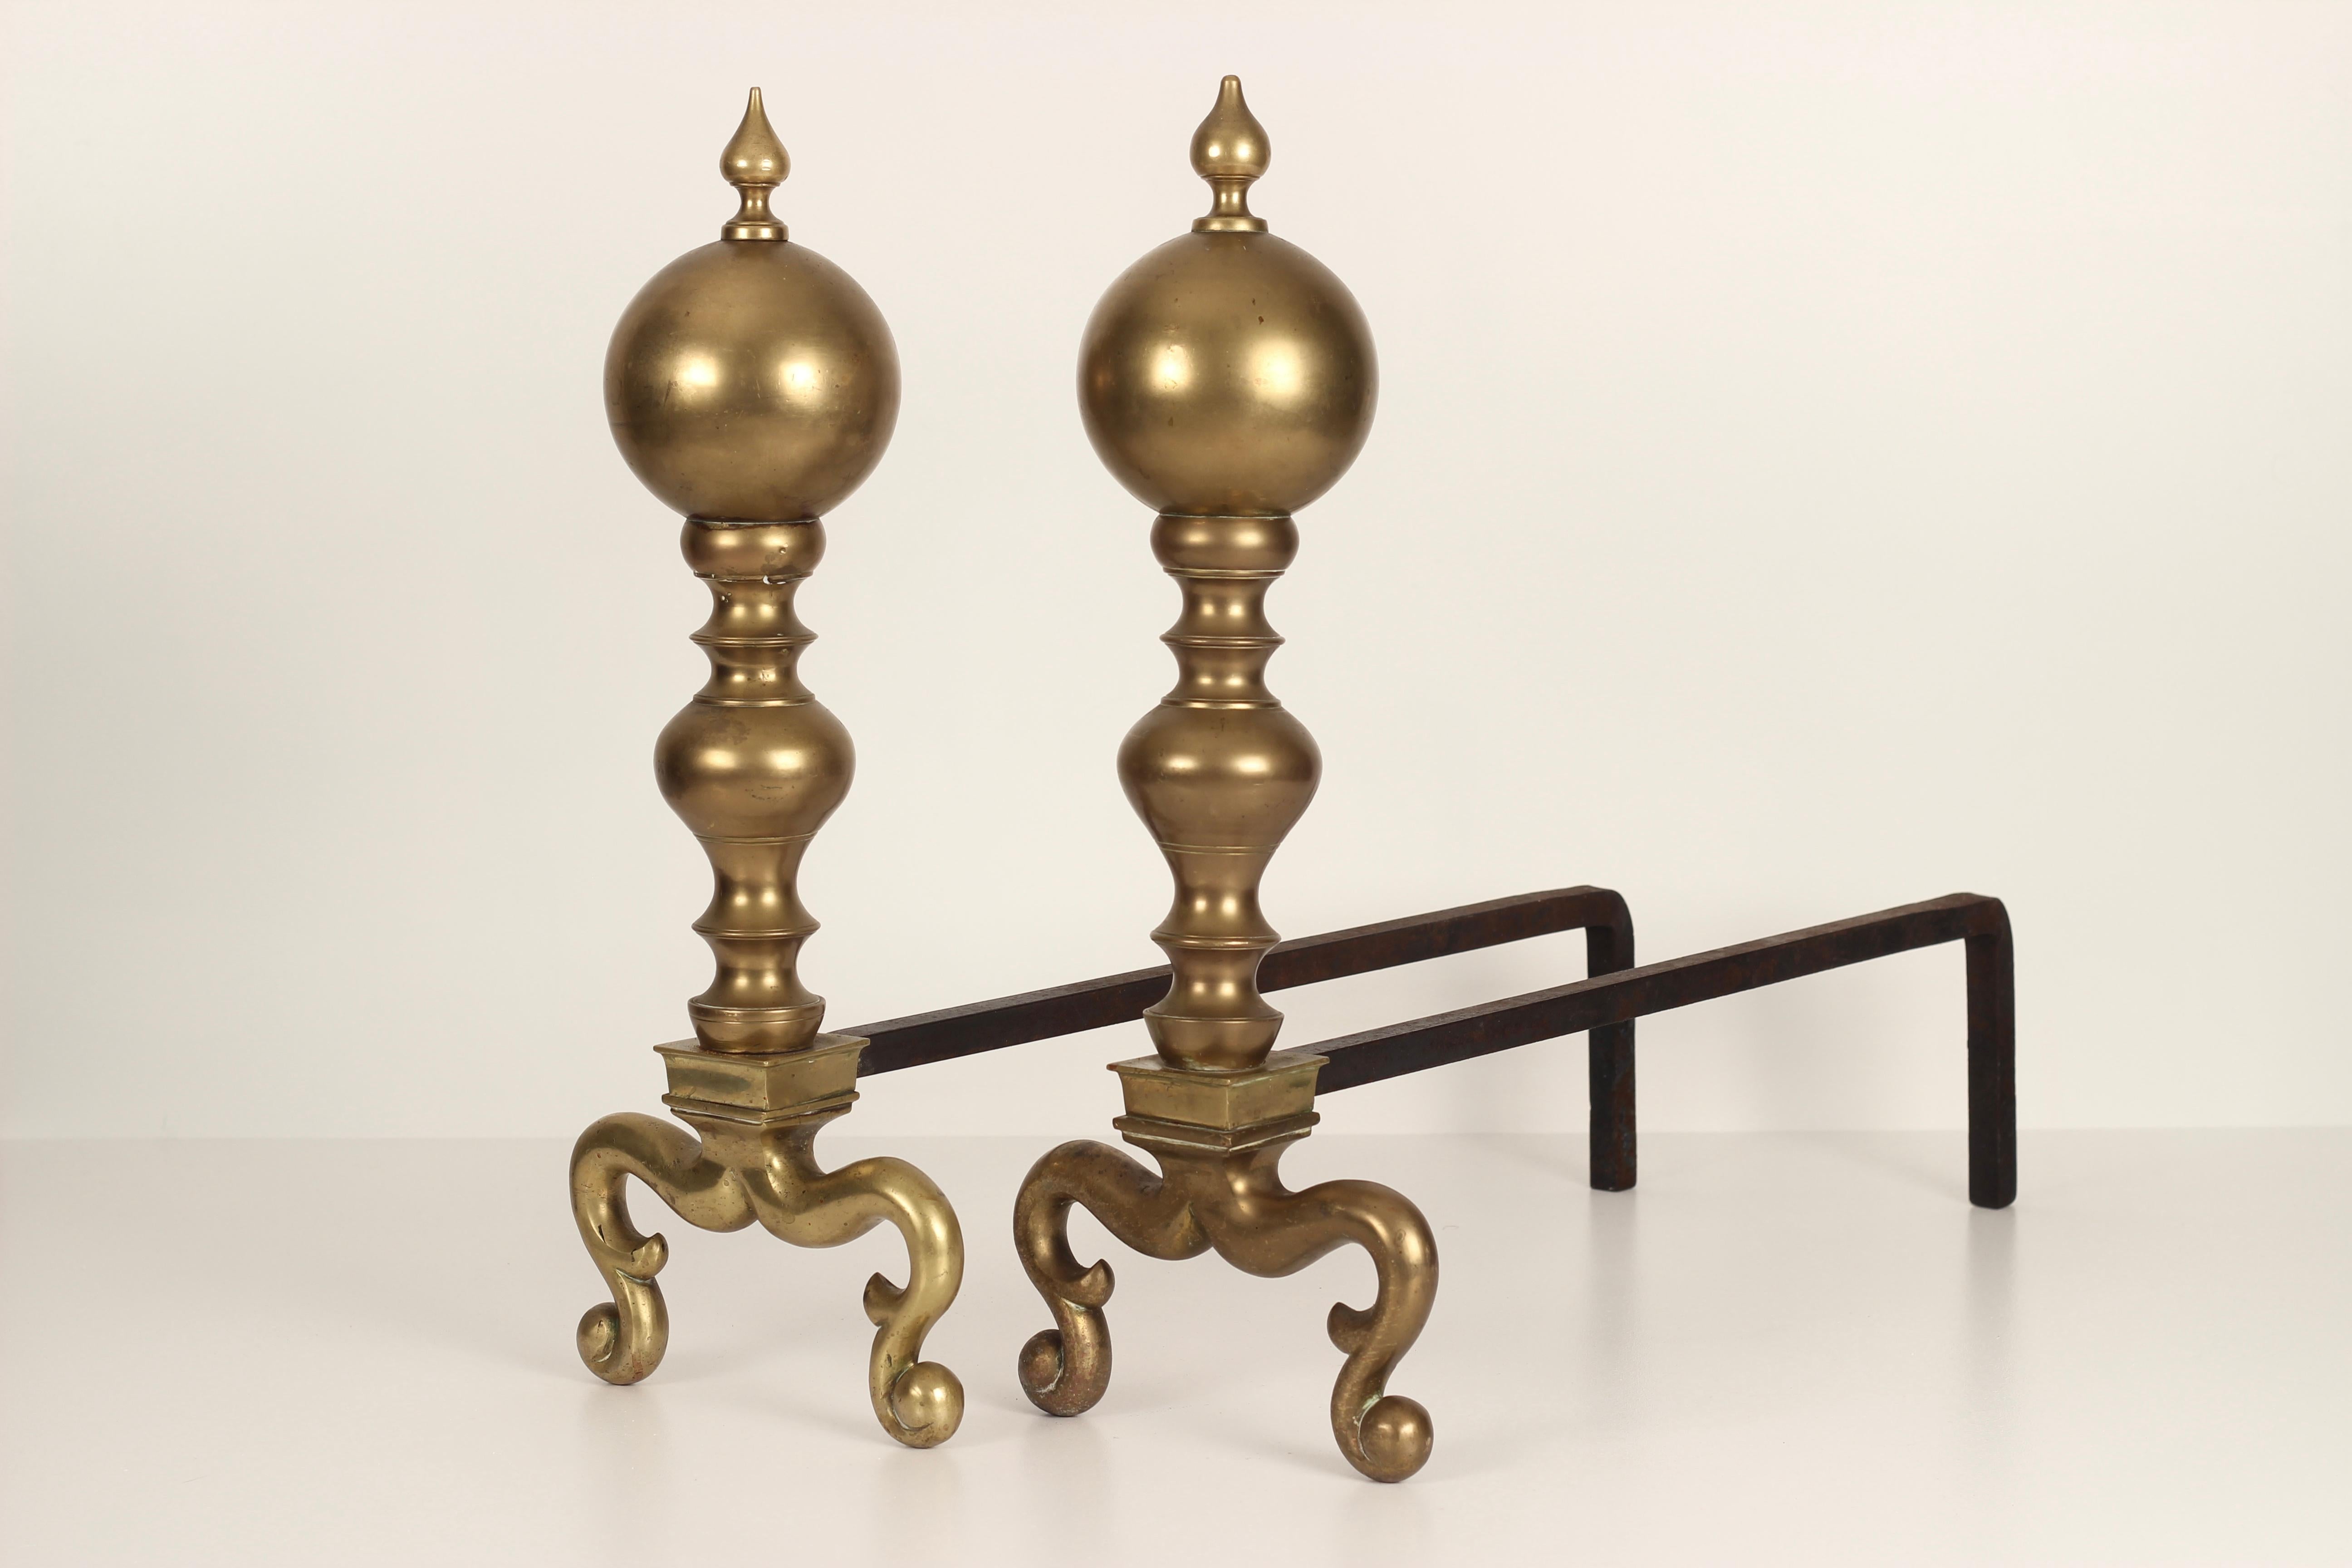 English Pair of Victorian Late 19th / Early 20thC Brass Fire Dogs or Andirons For Sale